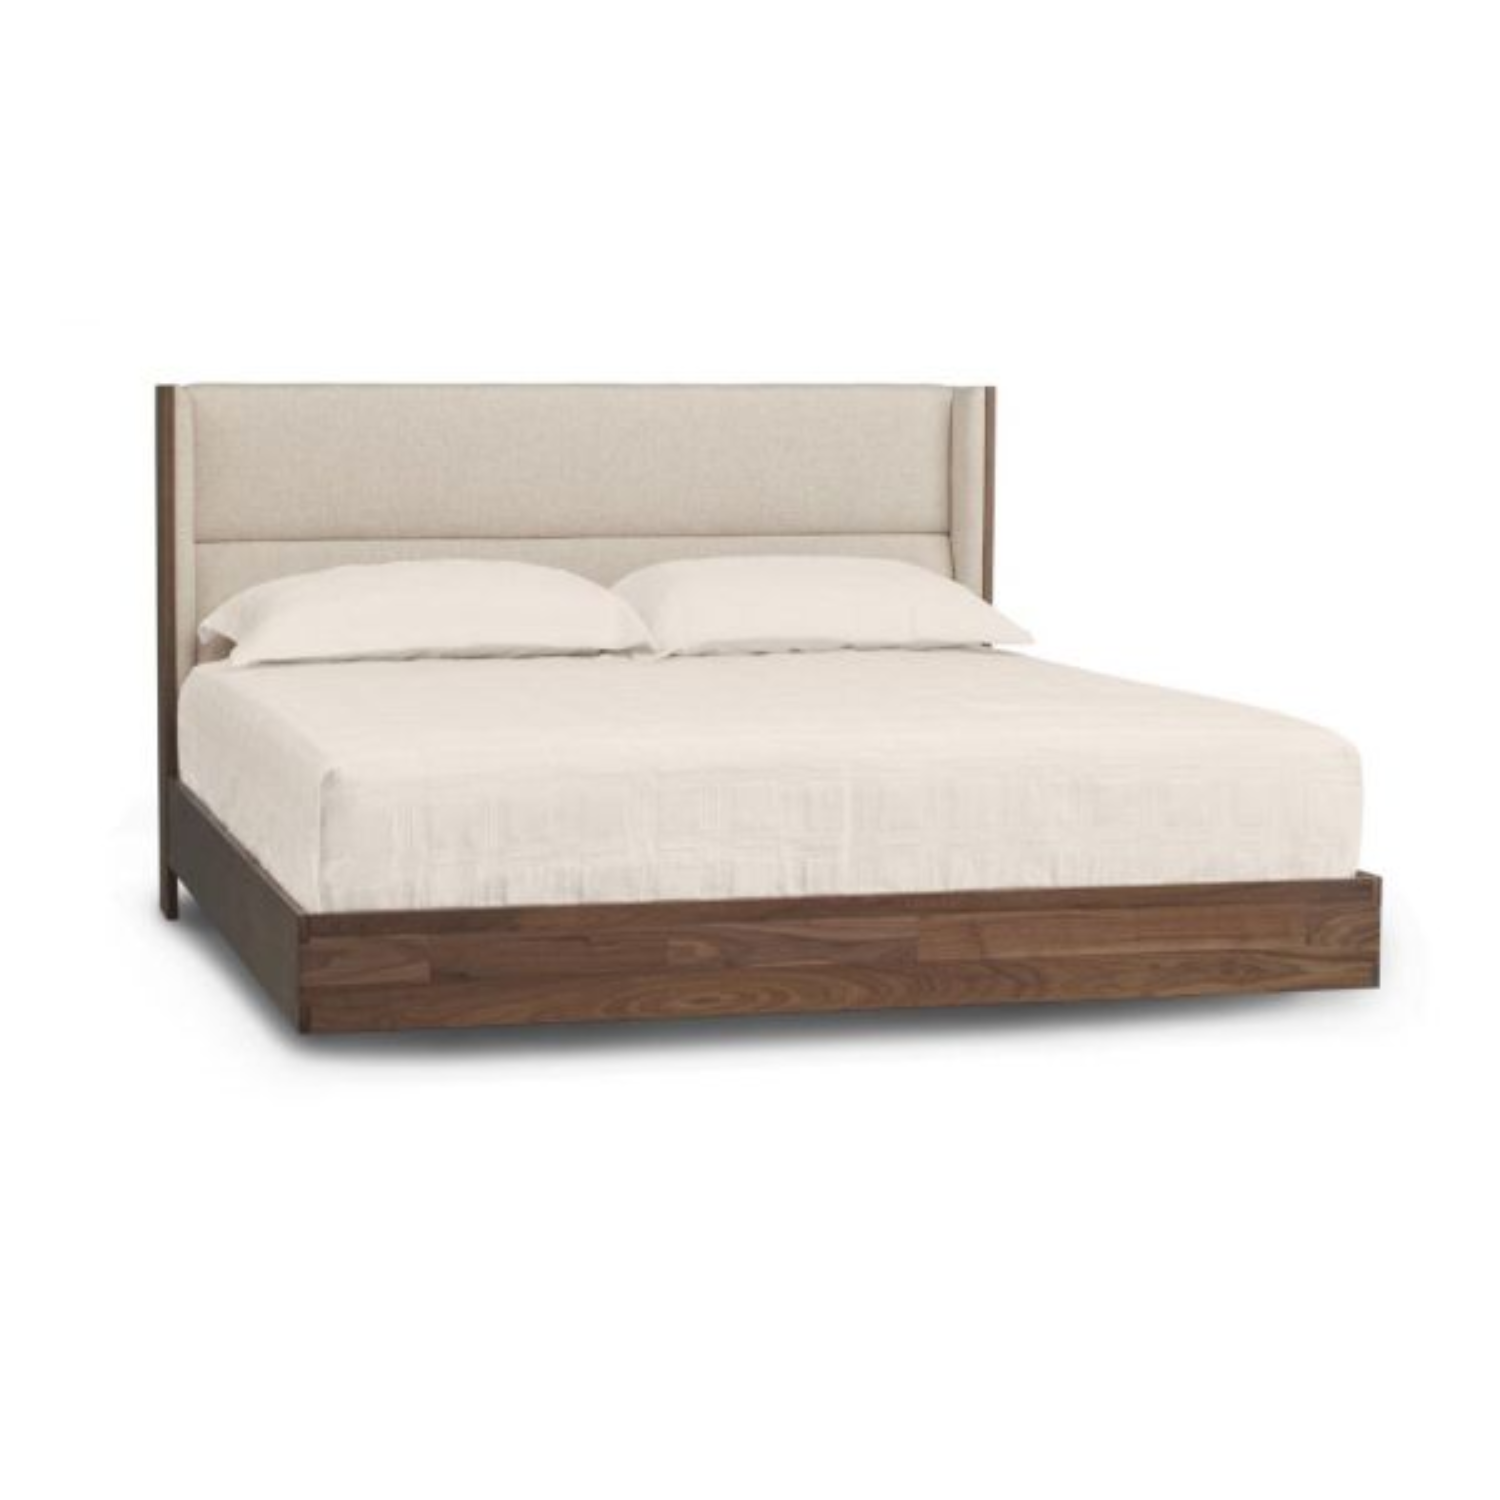 Sloane Natural Walnut Floating Queen Bed